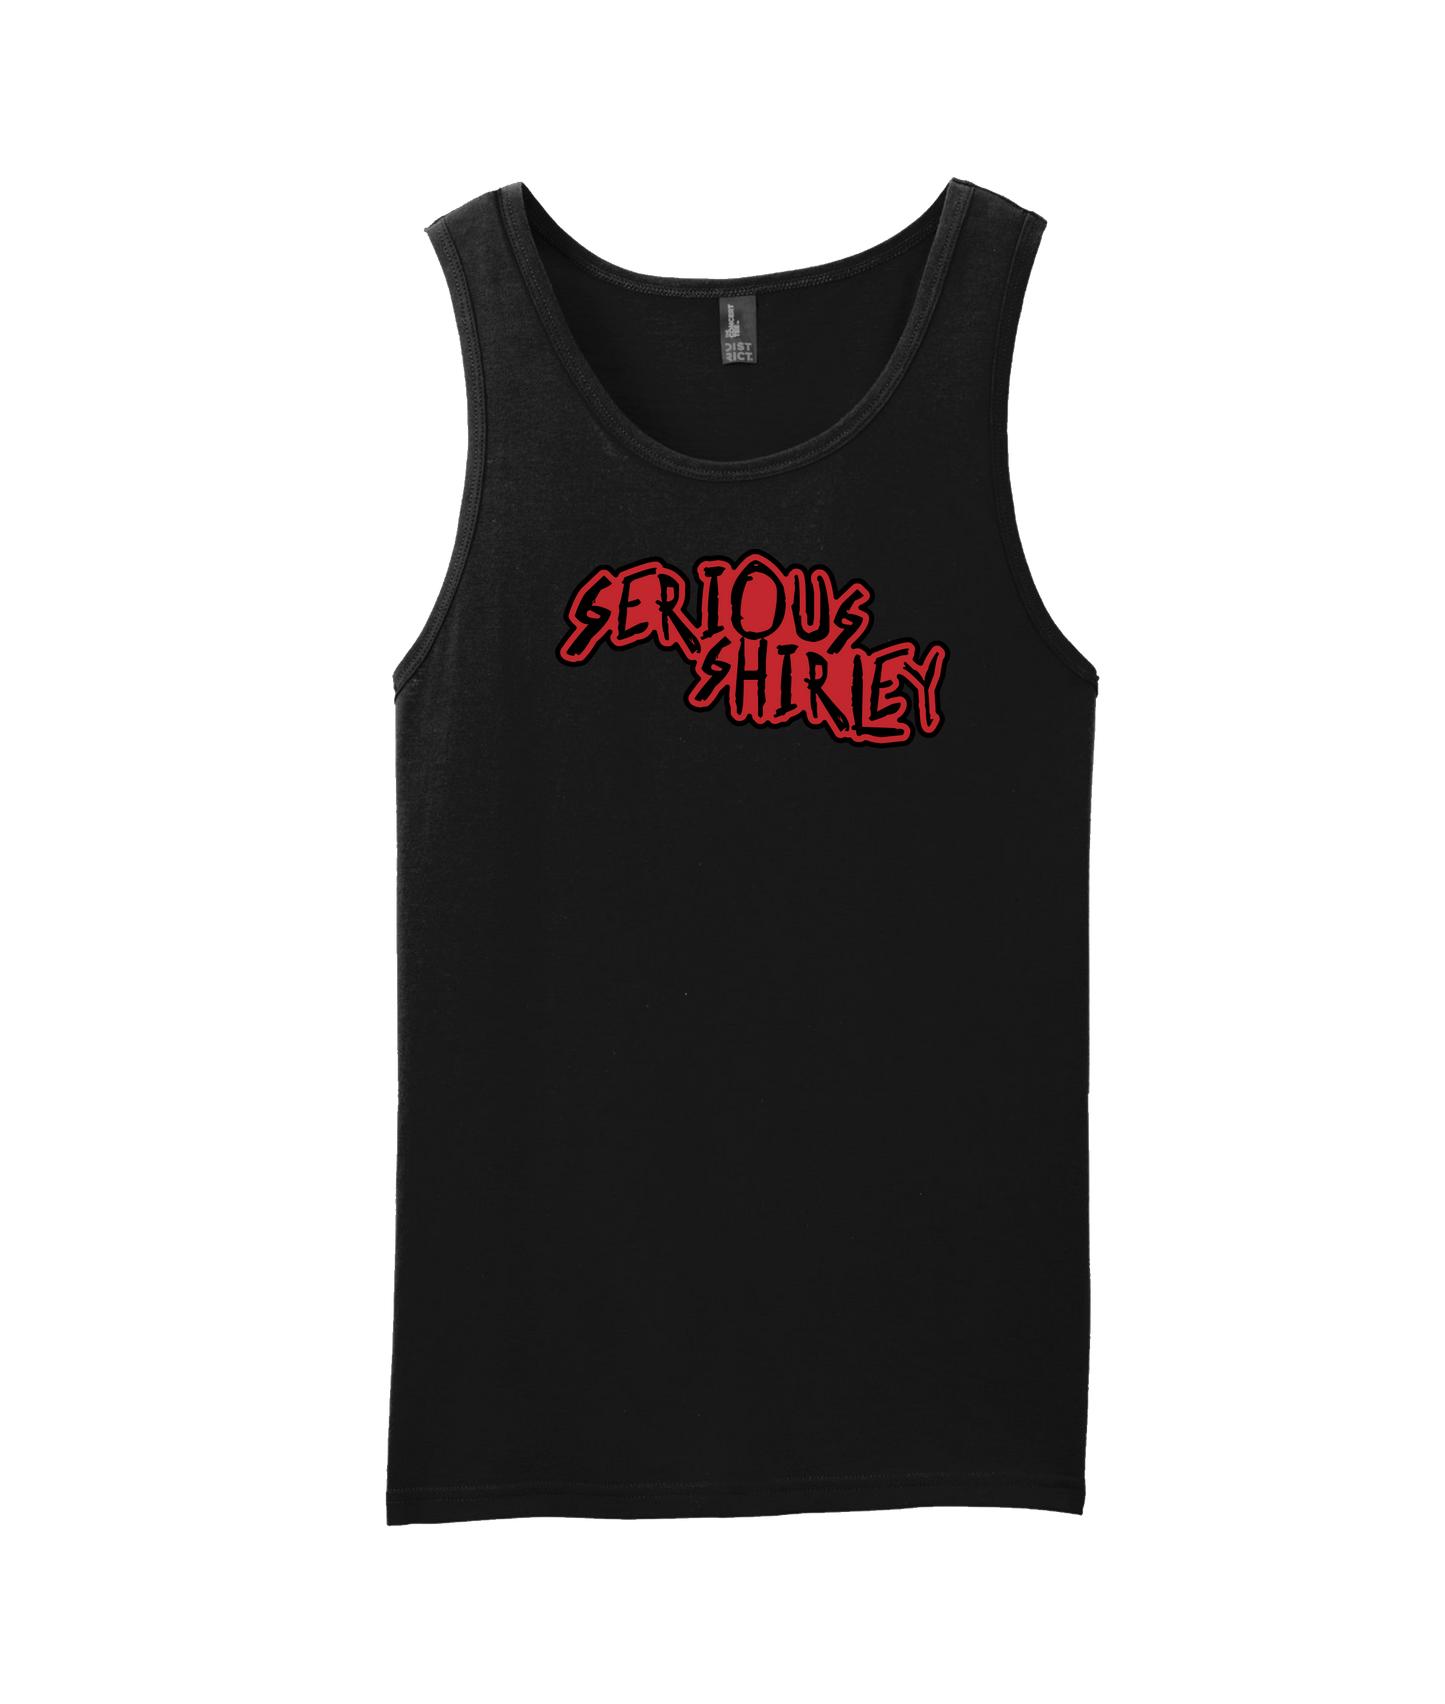 Serious Shirley - Red Scratch - Black Tank Top